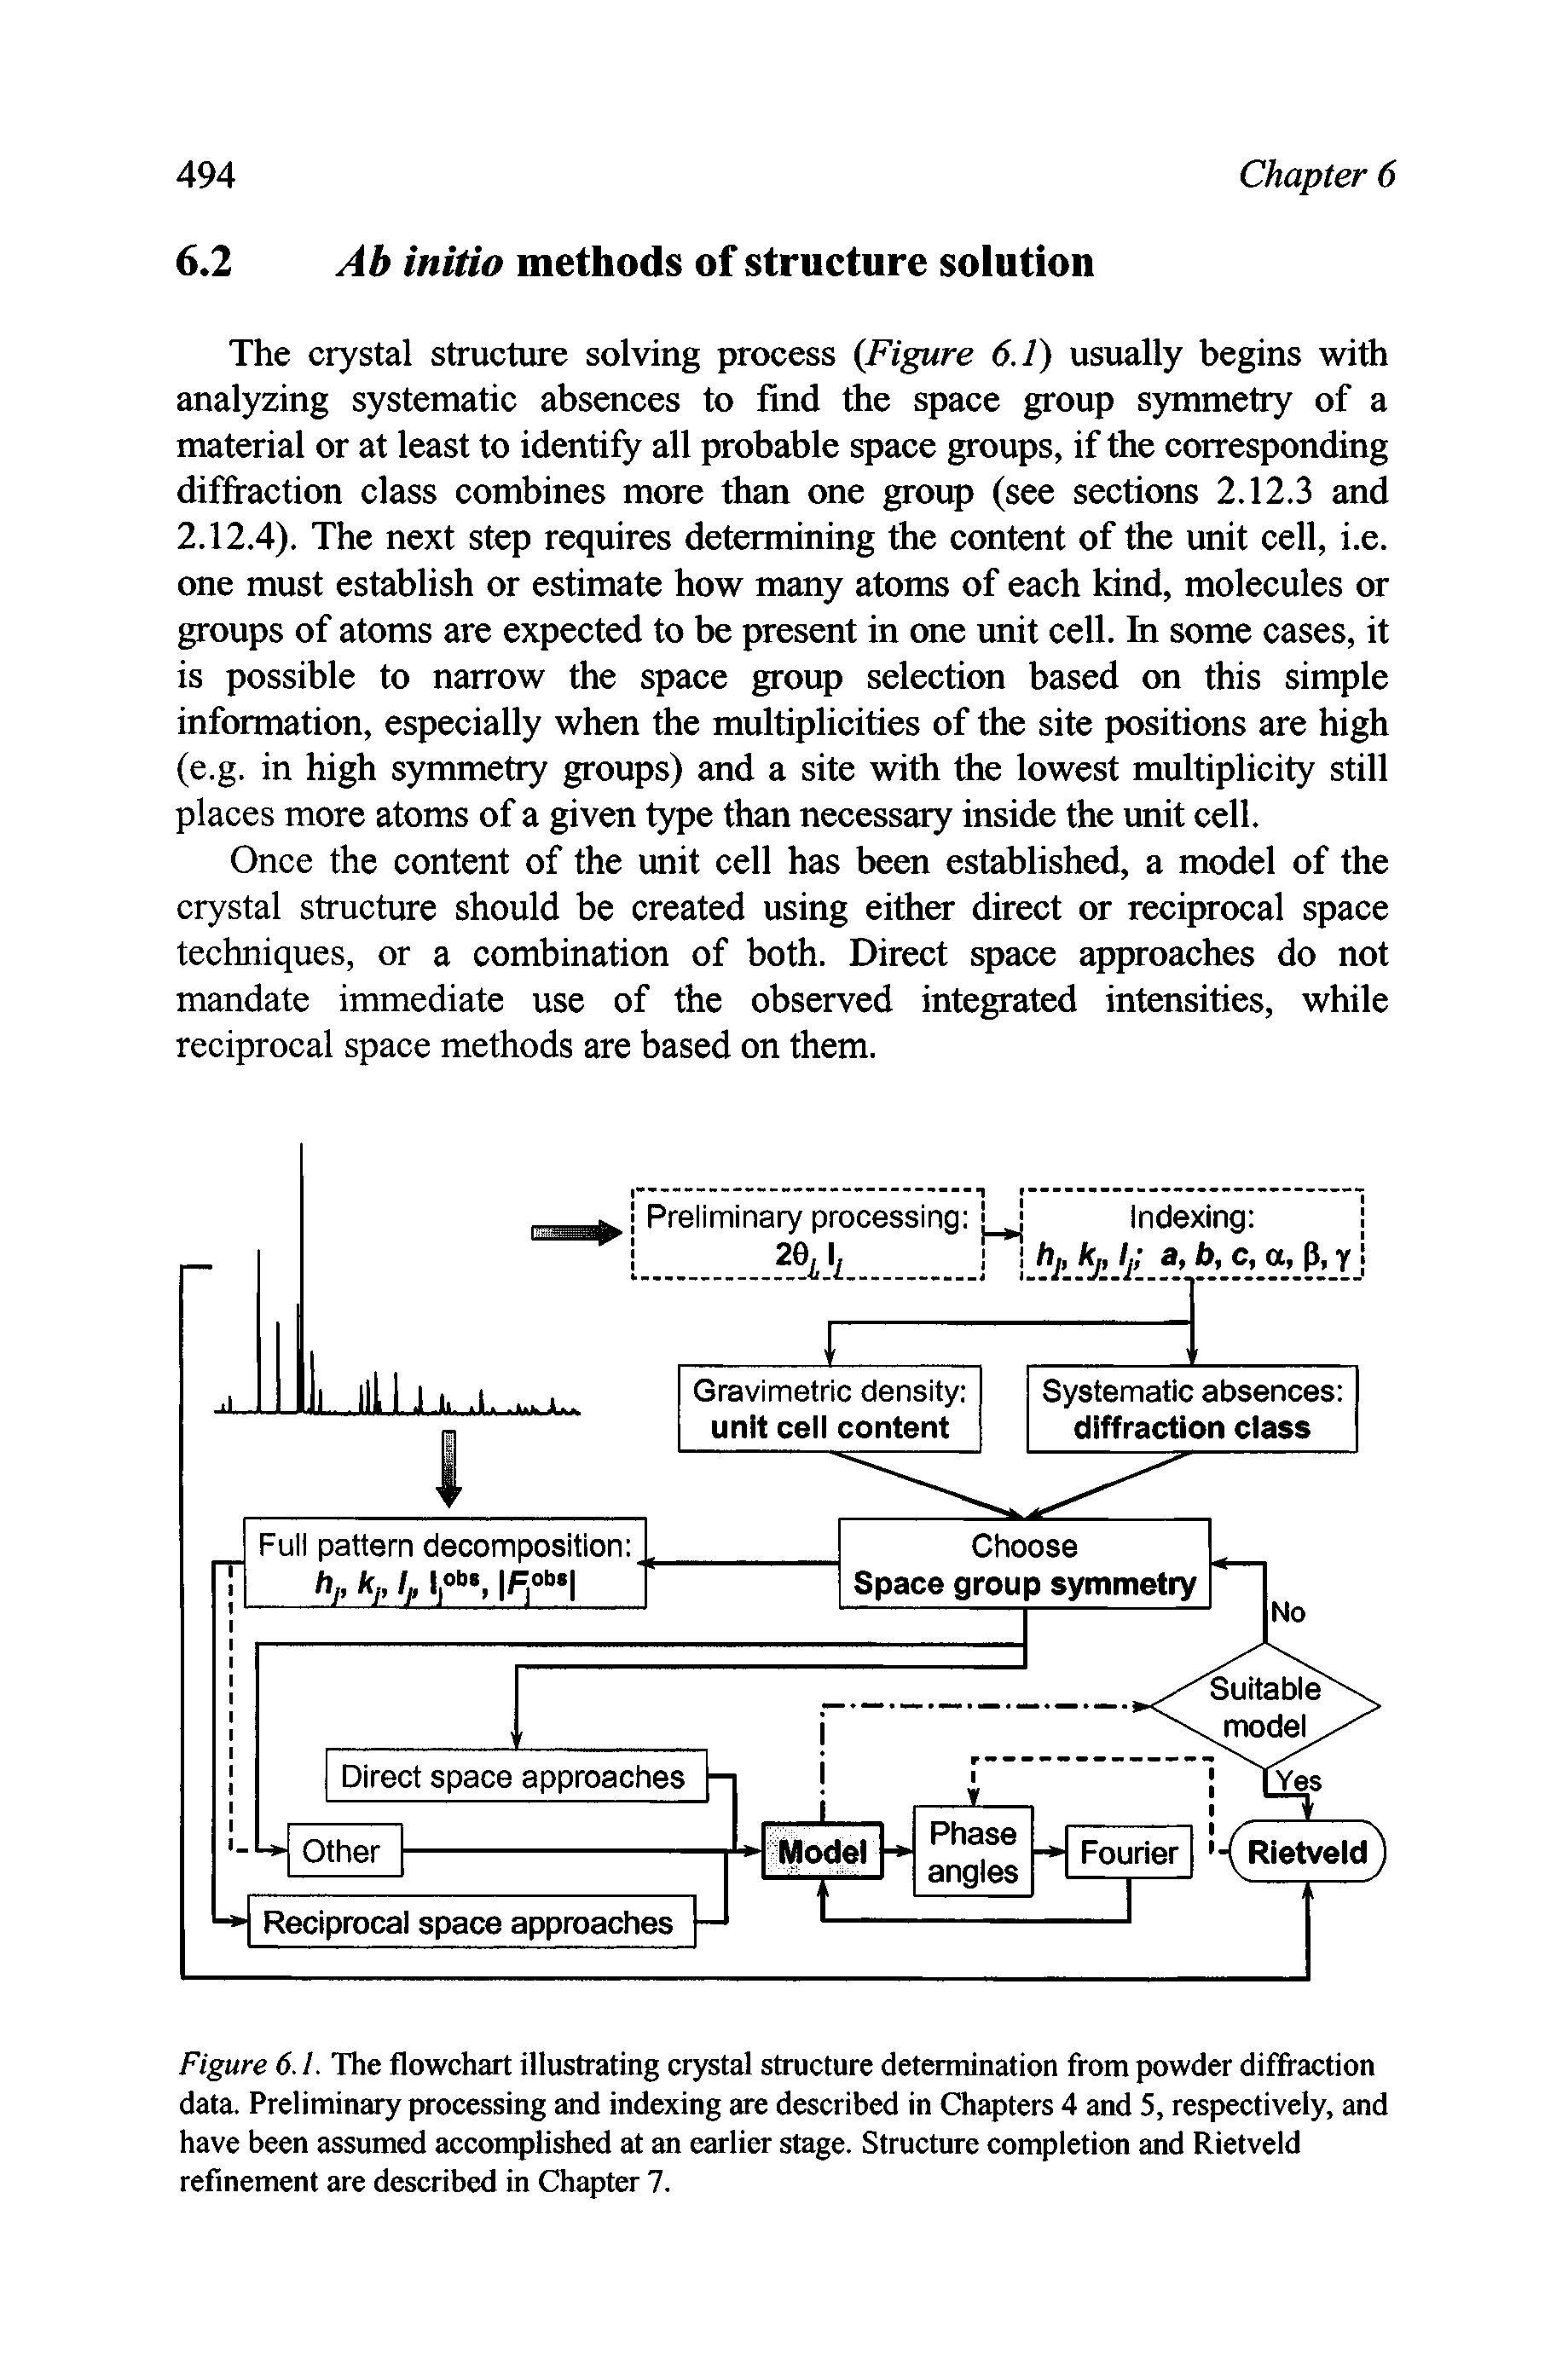 Figure 6.1. The flowchart illustrating crystal structure determination from powder diffraction data. Preliminary processing and indexing are described in Chapters 4 and 5, respectively, and have been assumed accomplished at an earlier stage. Structure completion and Rietveld refinement are described in Chapter 7.